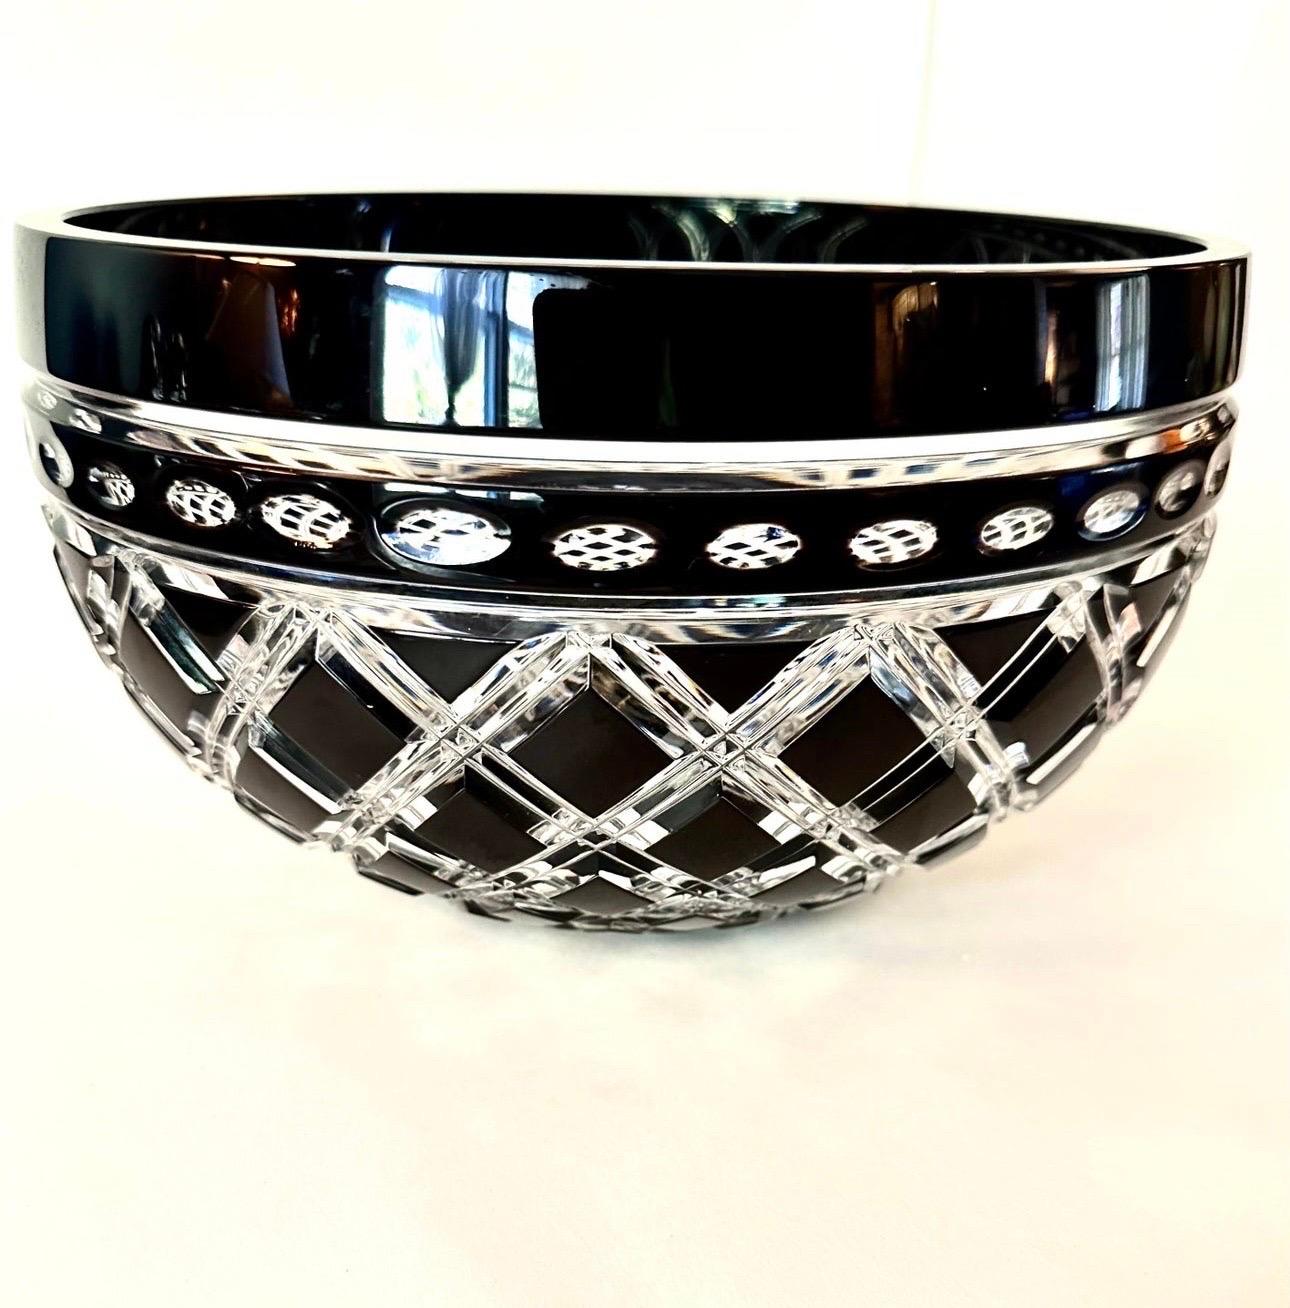 Vintage Early 20th Century Hand Cut Clear Crystal and black Onyx Large Serving Bowl made in Poland. A beautiful piece with a design modern enough to fit in any home. In excellent condition with no chips or cracks. Would look lovely as a centerpiece